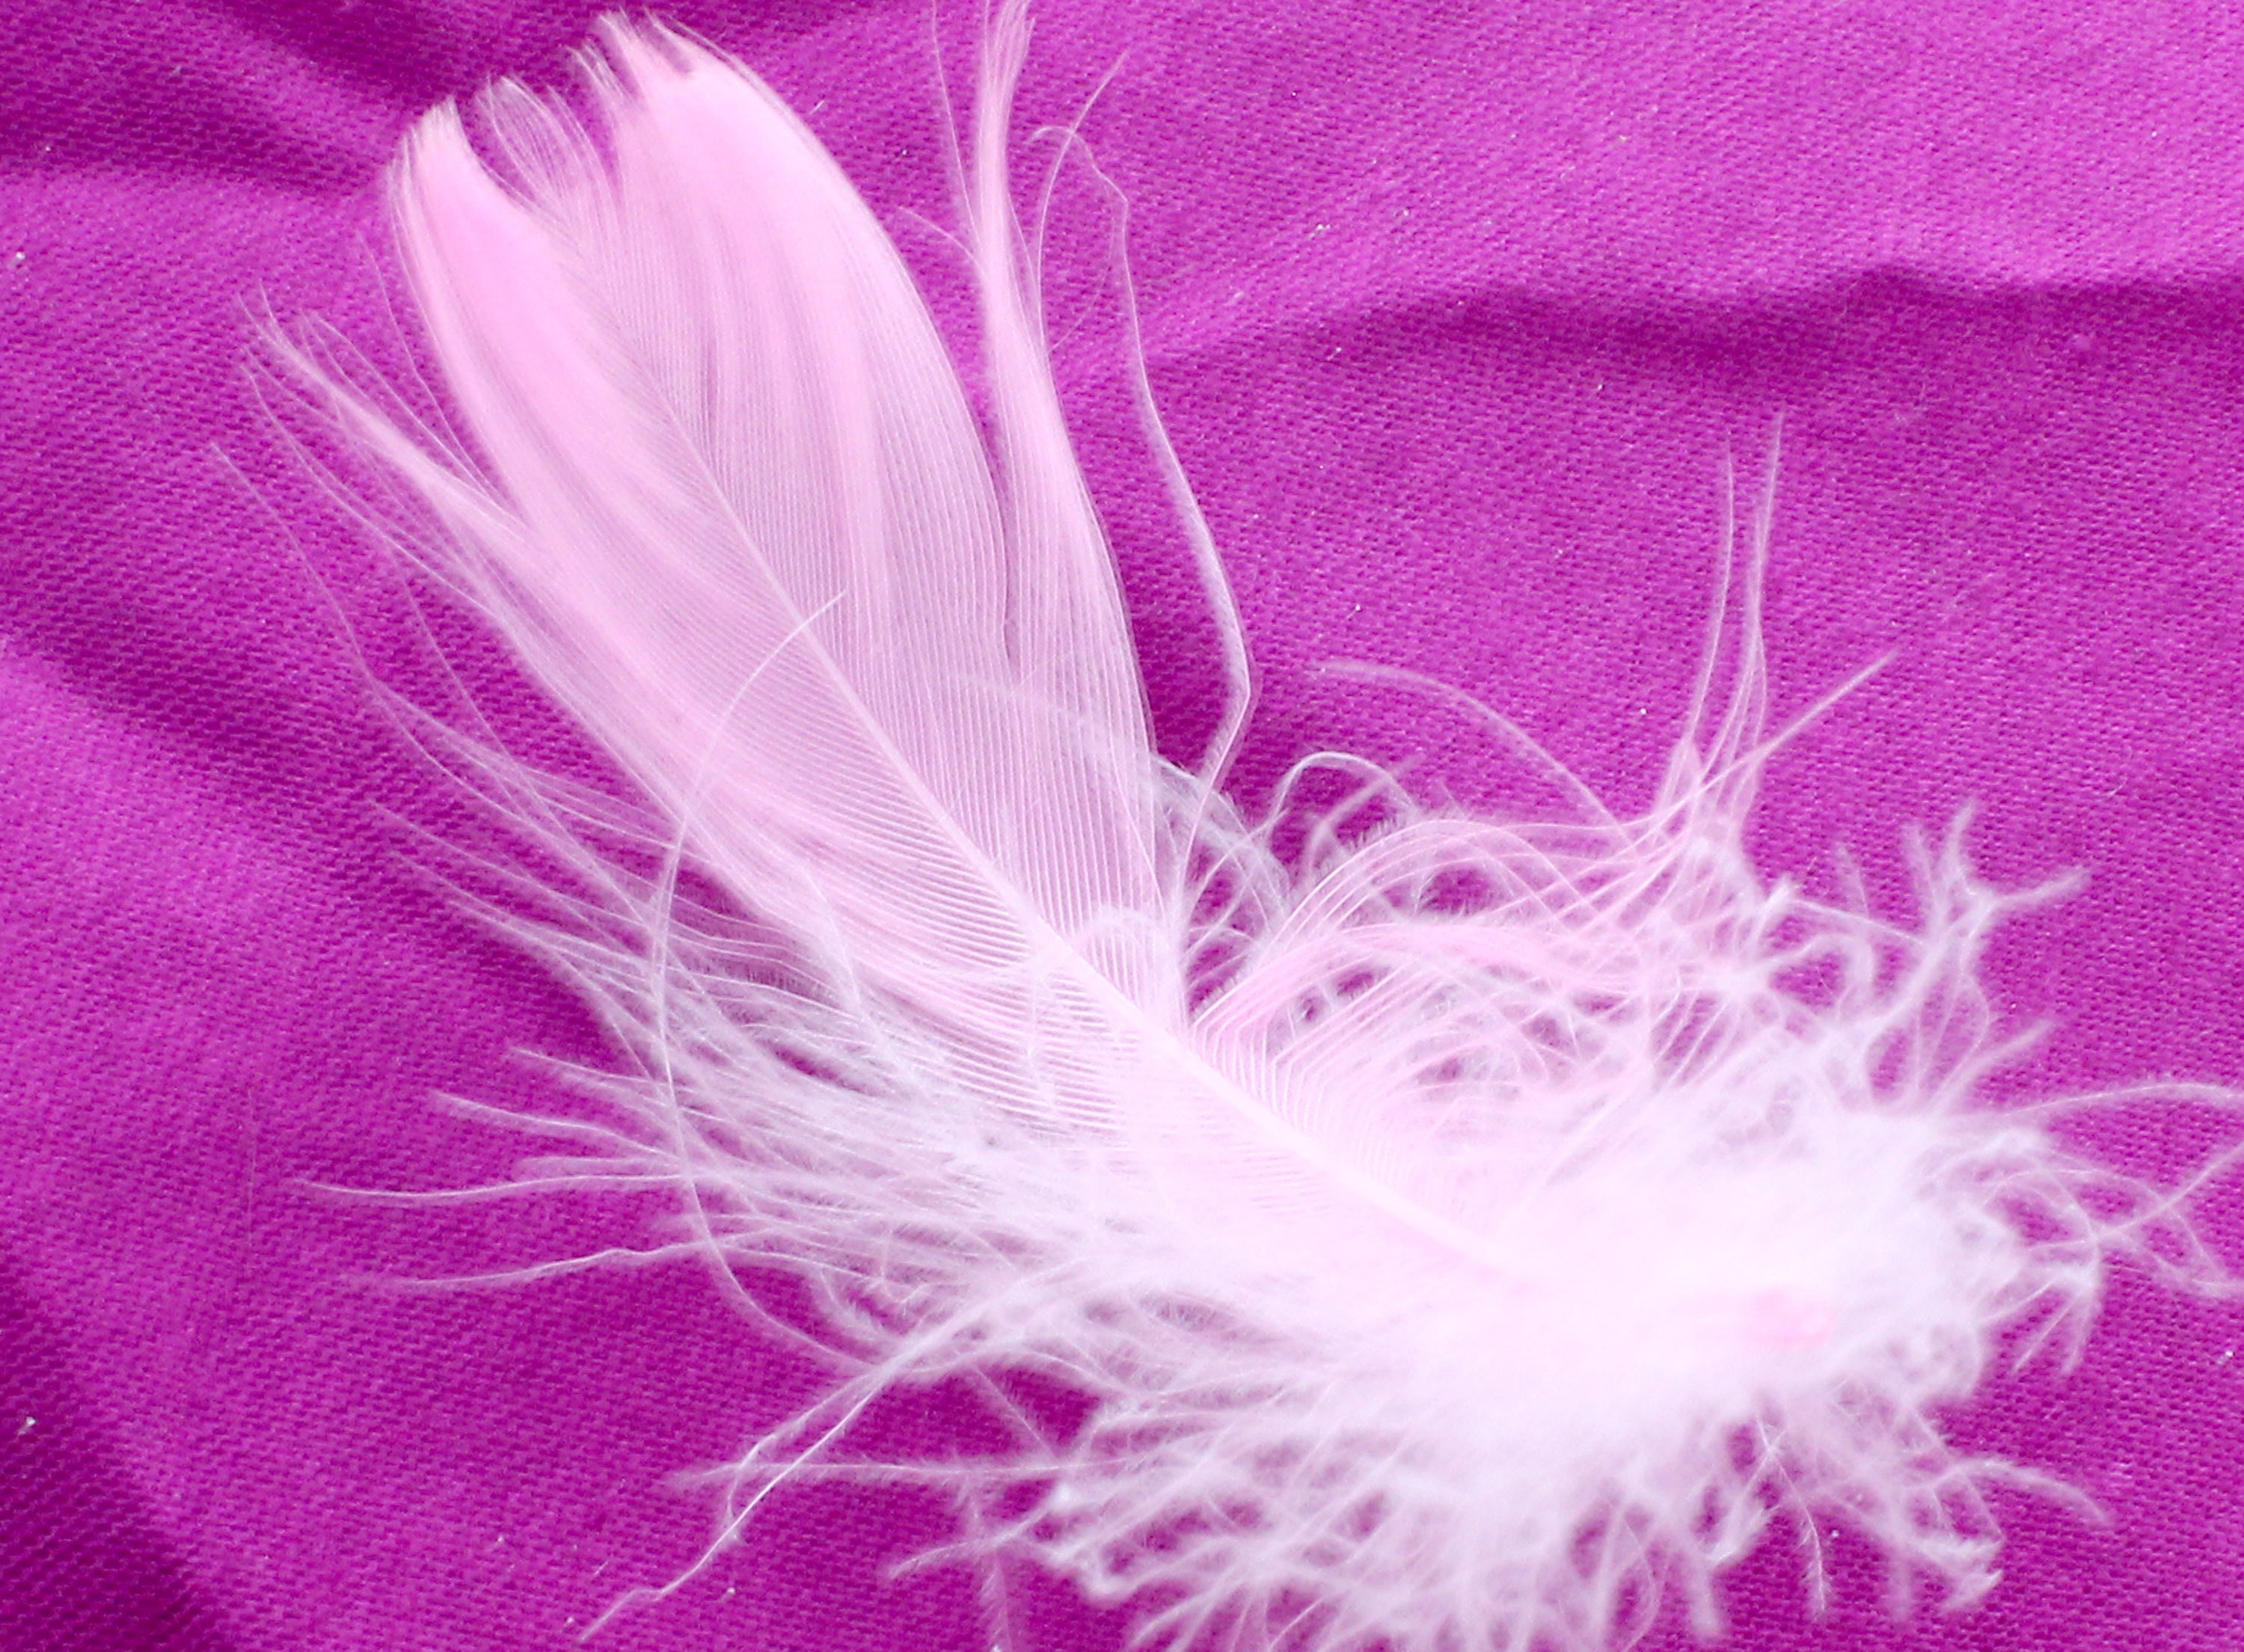 1-3 Inch Baby Pink Feathers. Light Colored Plumes for Making Cat Toys. A  Curved Bird Quills With Soft Fuzzy Bottom for Dream Catchers 